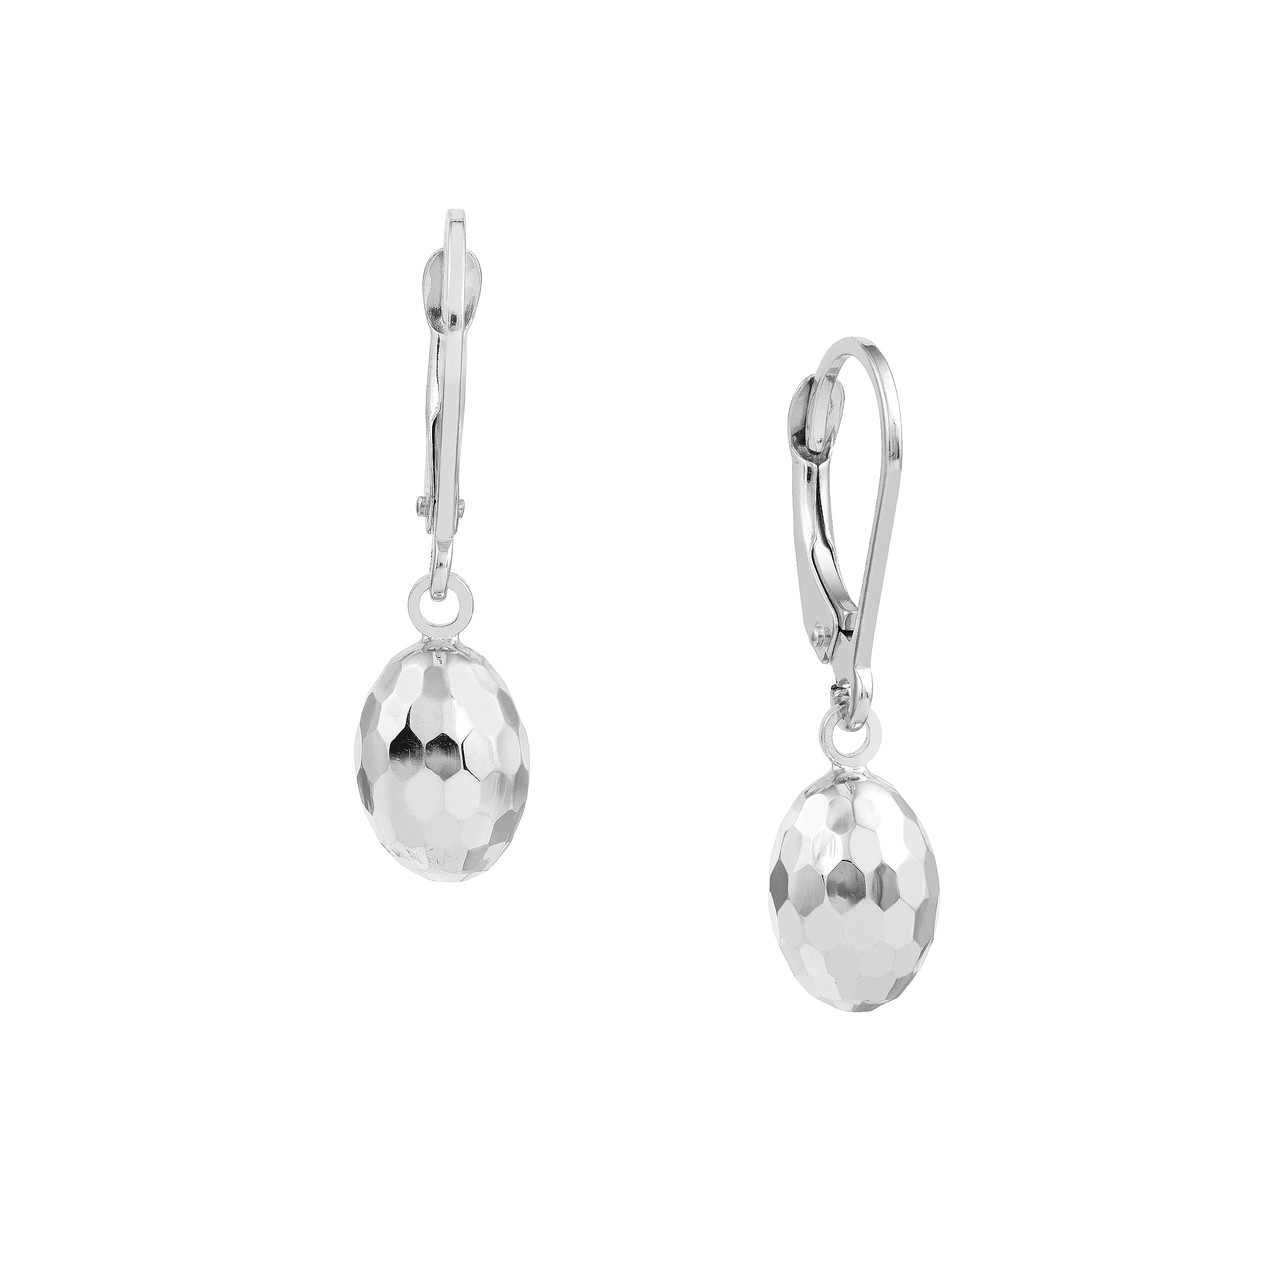 Textured Egg-Shaped Earrings on Leverback